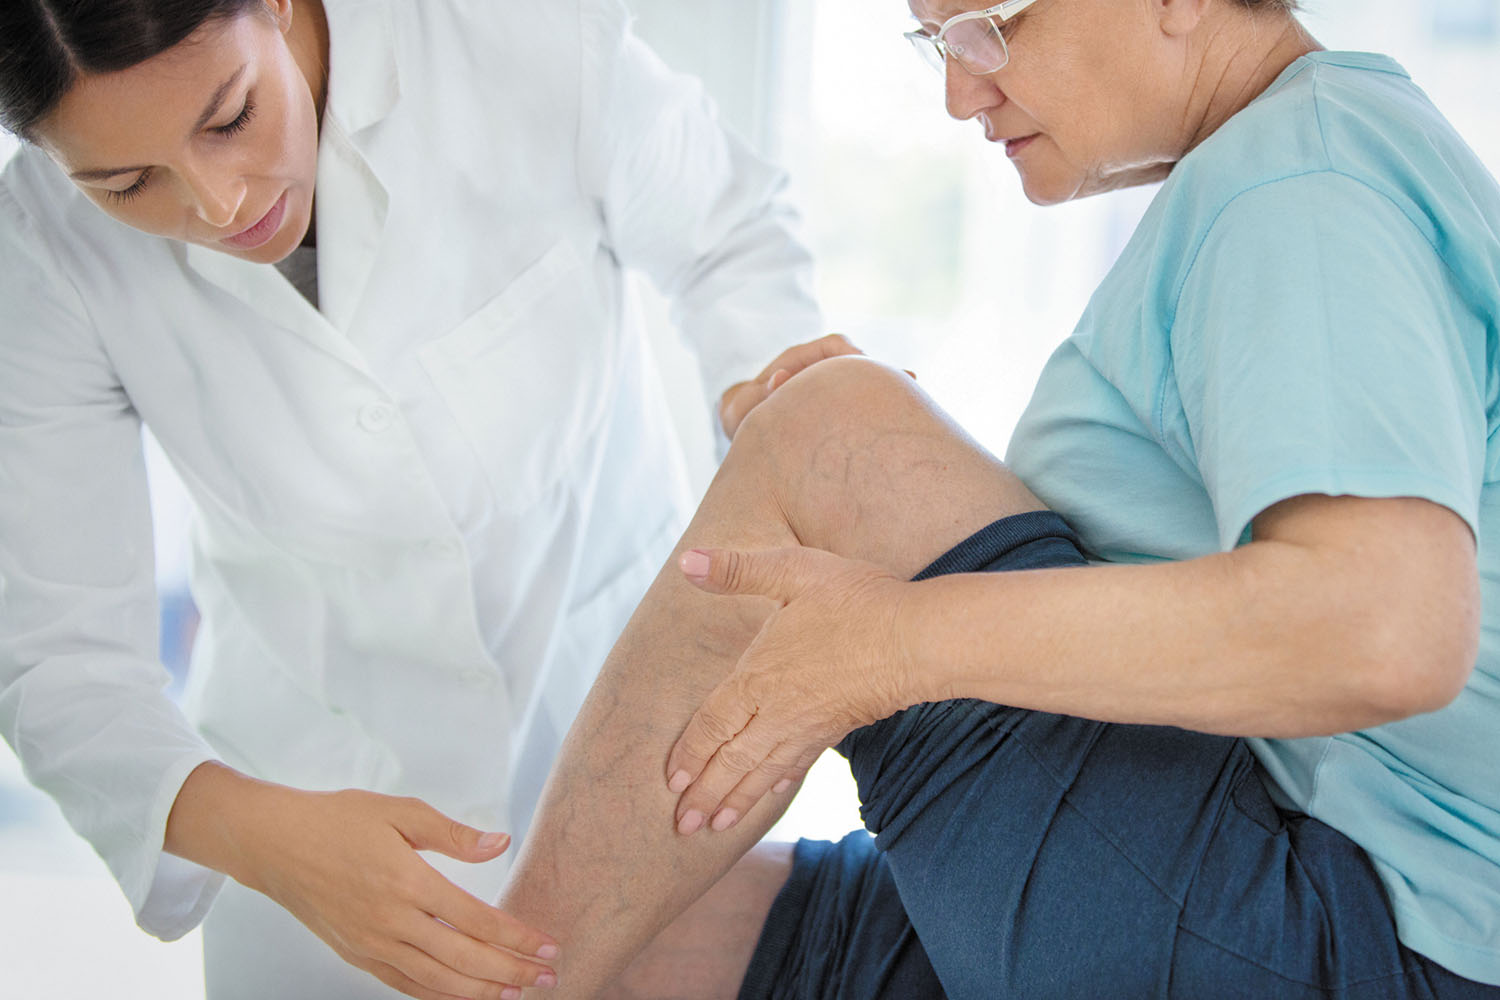 What Are Your Options When Treating Varicose Veins